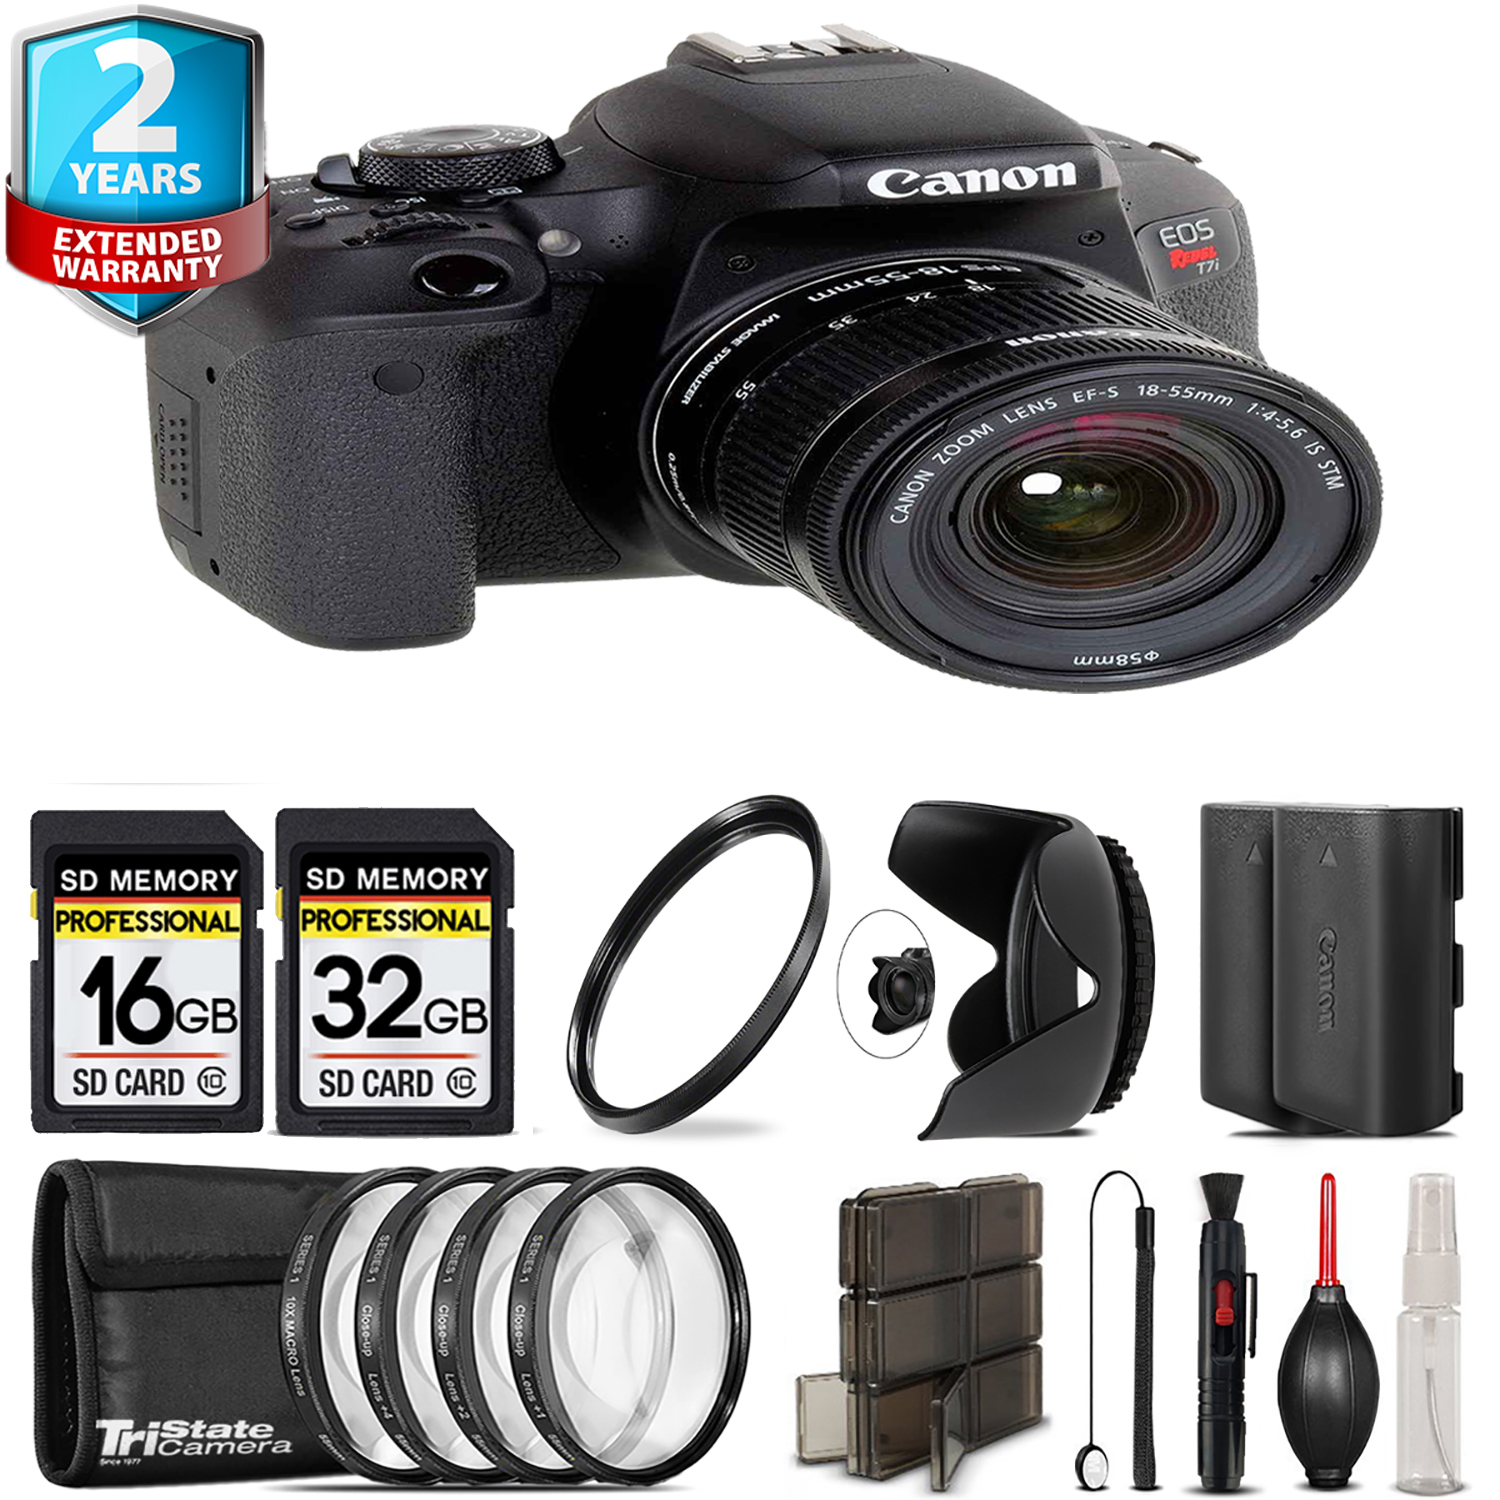 EOS Rebel T7i + 18-55mm IS STM + 4 Piece Macro Set + Extra Battery - 48GB *FREE SHIPPING*